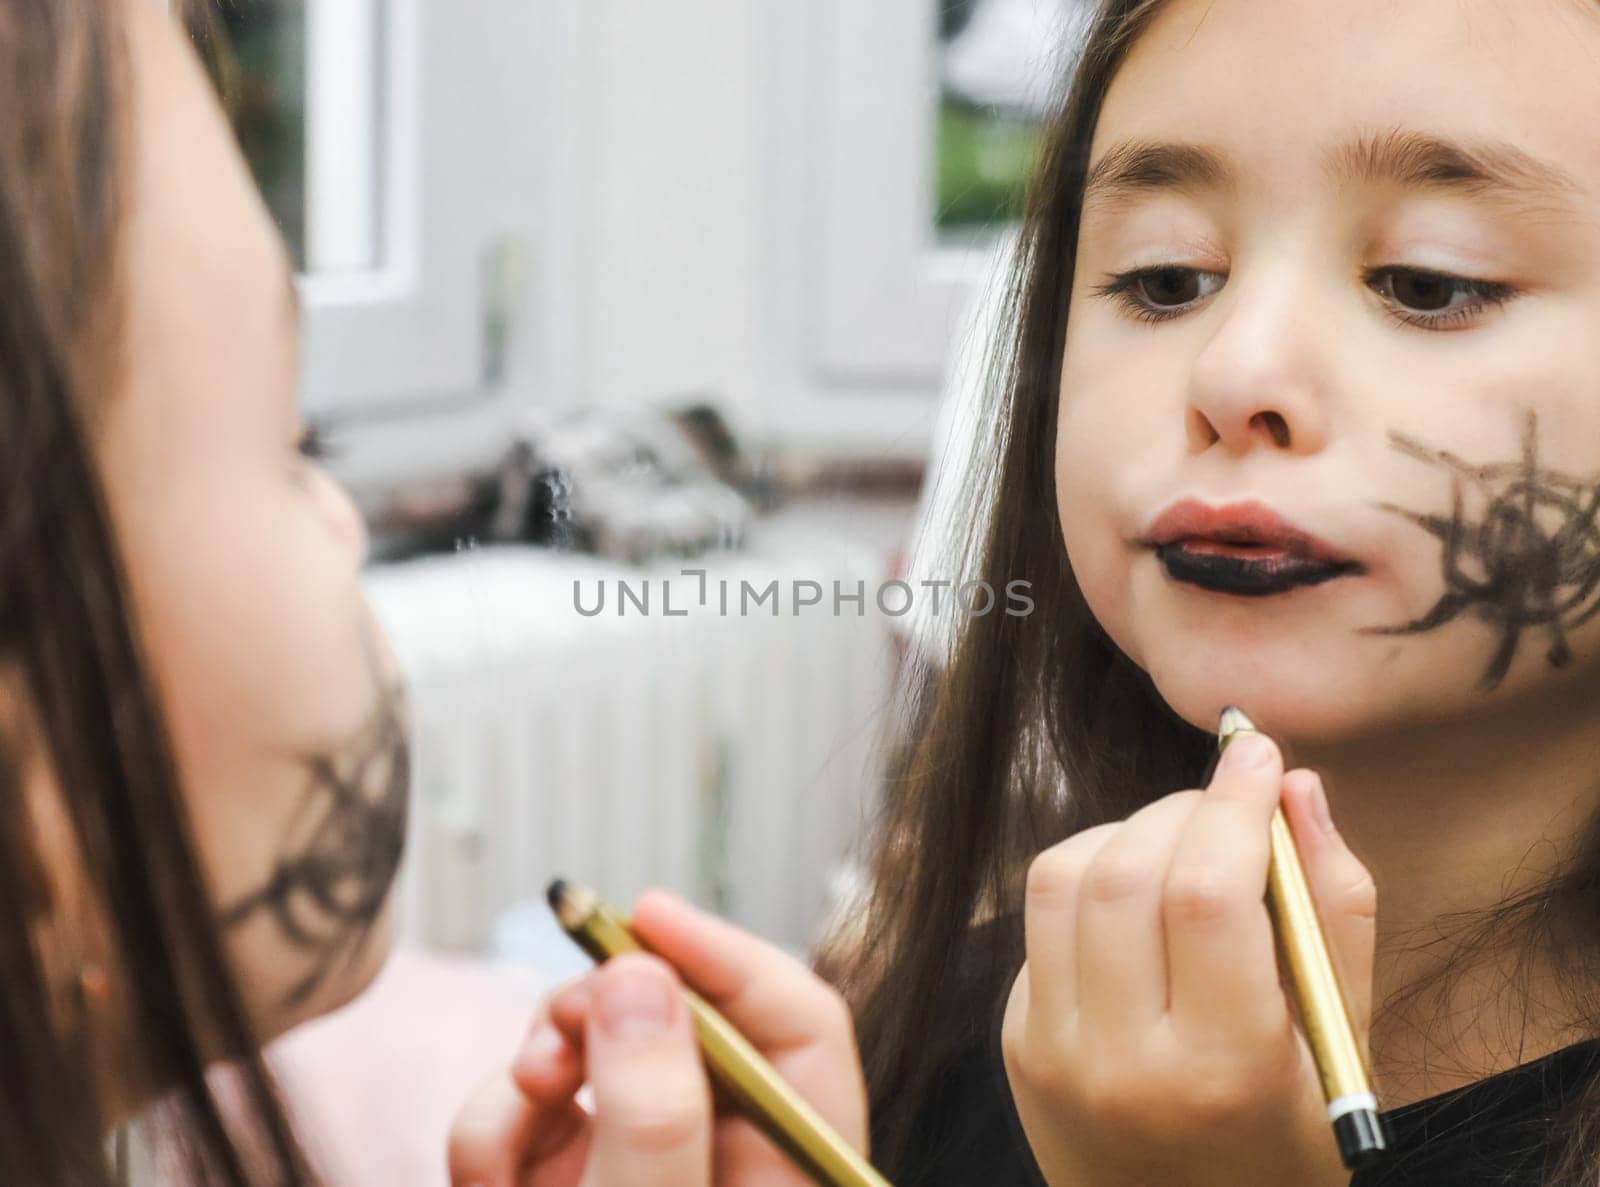 Caucasian brunette girl with brown eyes and black painted cobwebs on her cheek paints her lips with a pencil, looking in the mirror and getting ready for the celebration of Halloween, close-up side view. Halloween preparation concept, halloween makeup.